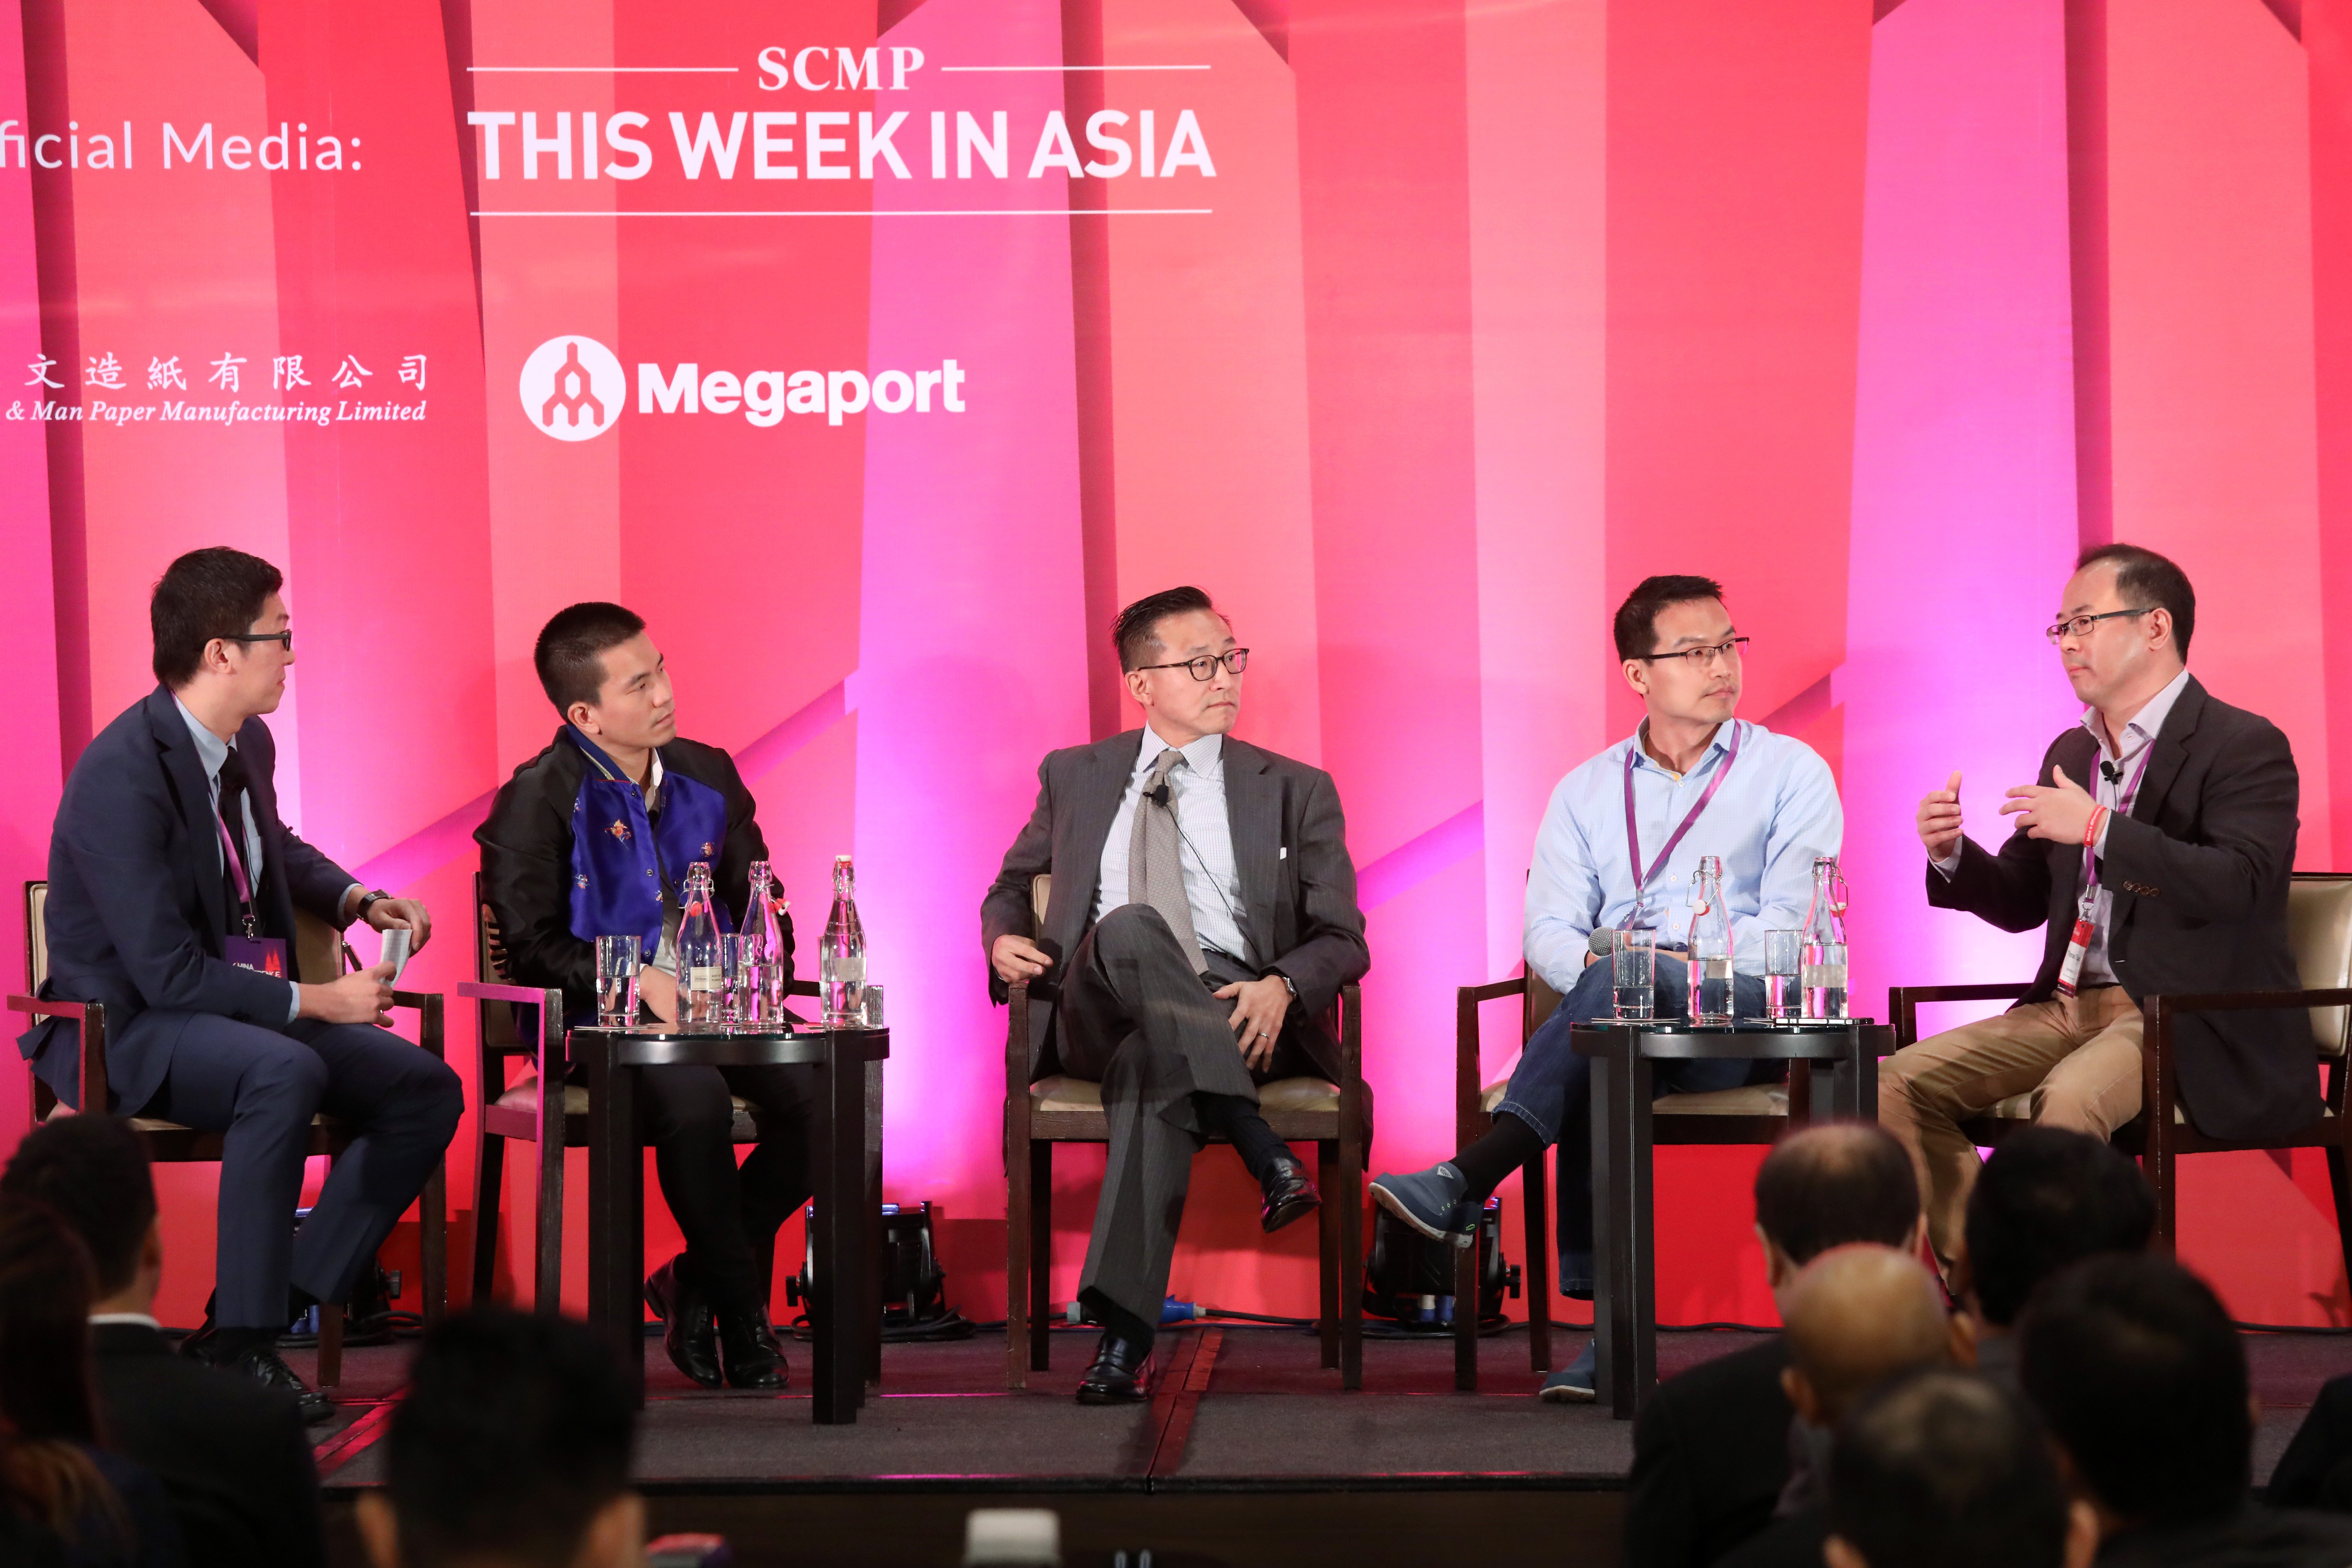 (left to right): Moderator Chua Kong-ho, the Post’s technology editor; Khailee Ng, 500 Startups managing partner; Joe Tsai, Alibaba Group executive vice-chairman and the Post’s chairman; Ming Maa, Grab president; and Thomas Tsao, Gobi Partners founding partner, at the China in Southeast Asia forum (China Conference) on Wednesday in Kuala Lumpur, Malaysia. Photo: K.Y. Cheng